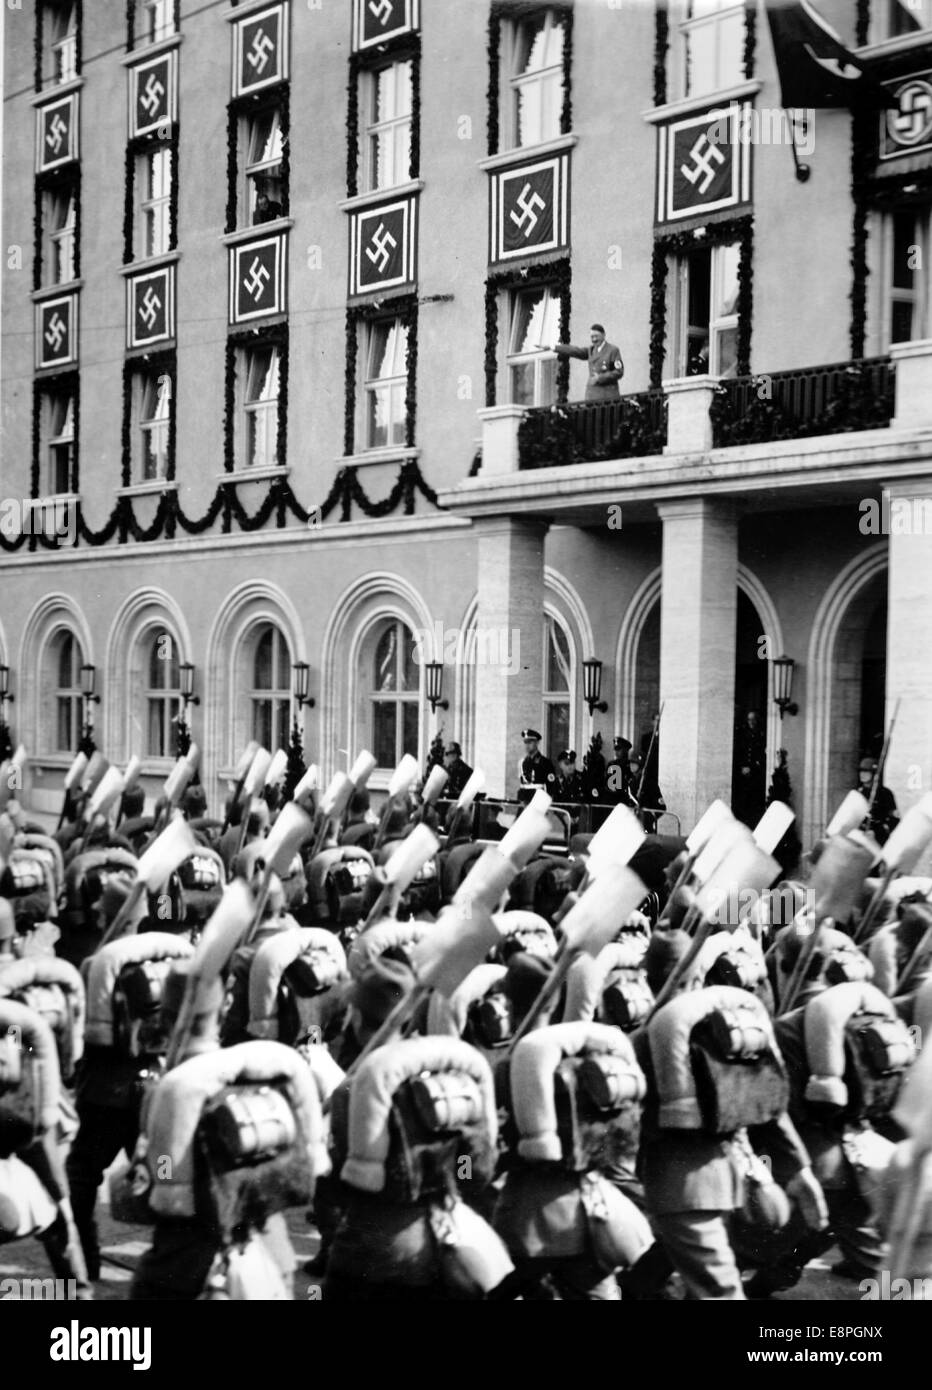 Nuremberg Rally 1936 in Nuremberg, Germany - Members of the Reich Labour Service (RAD) carry backpacks and spades as they march past Adolf Hitler who is standing on the balcony of the hotel 'Deutscher Hof'. (Flaws in quality due to the historic picture copy) Fotoarchiv für Zeitgeschichtee - NO WIRE SERVICE - Stock Photo